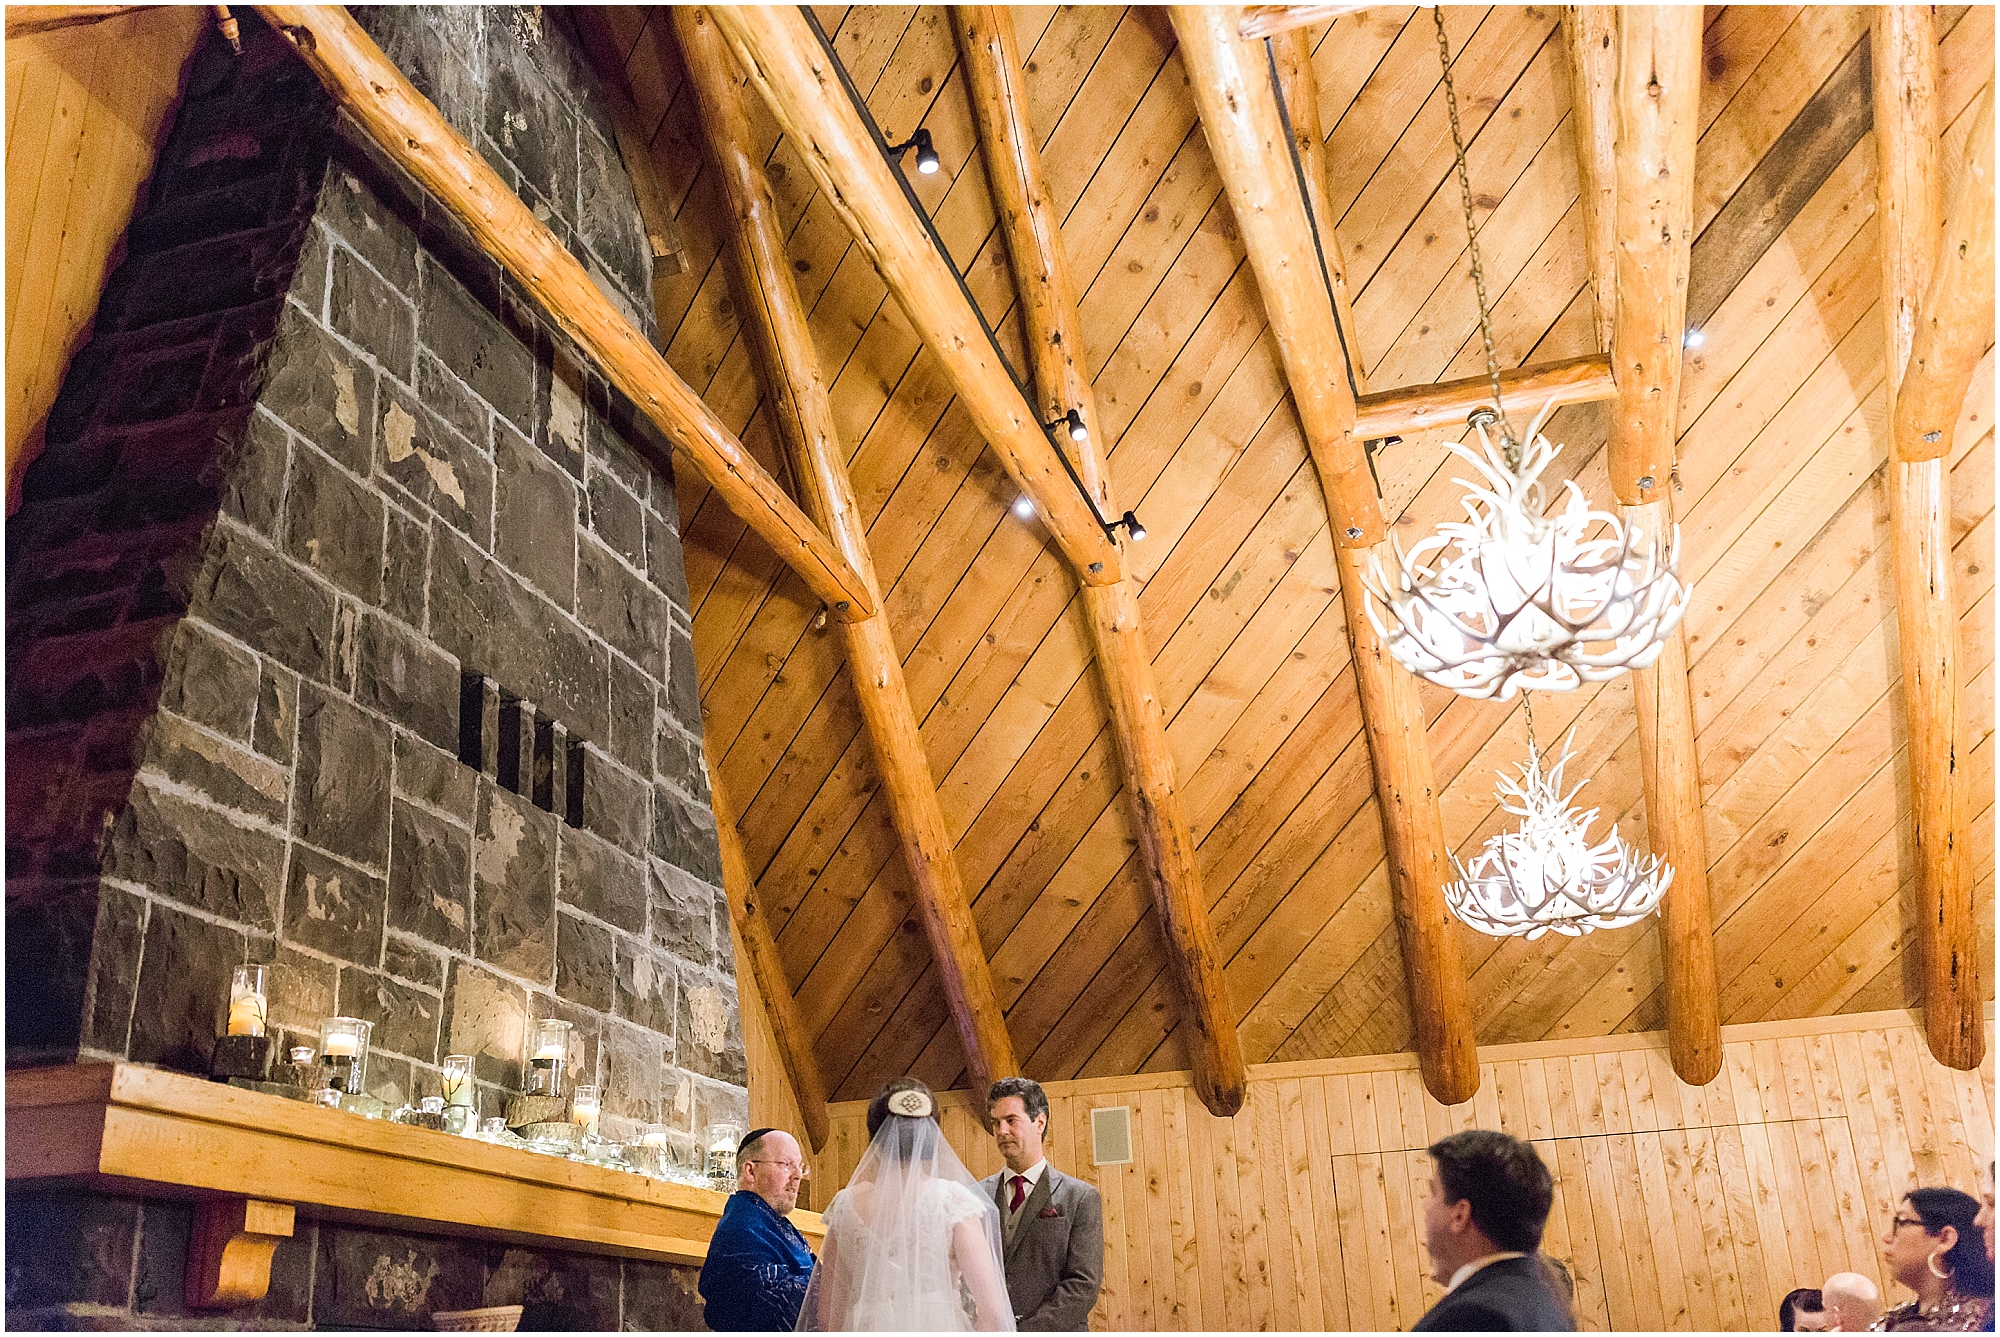 The grand wooden ceiling & stone fireplace at Sunriver Resort provide a warm space for an intimate wedding. | Erica Swantek Photography